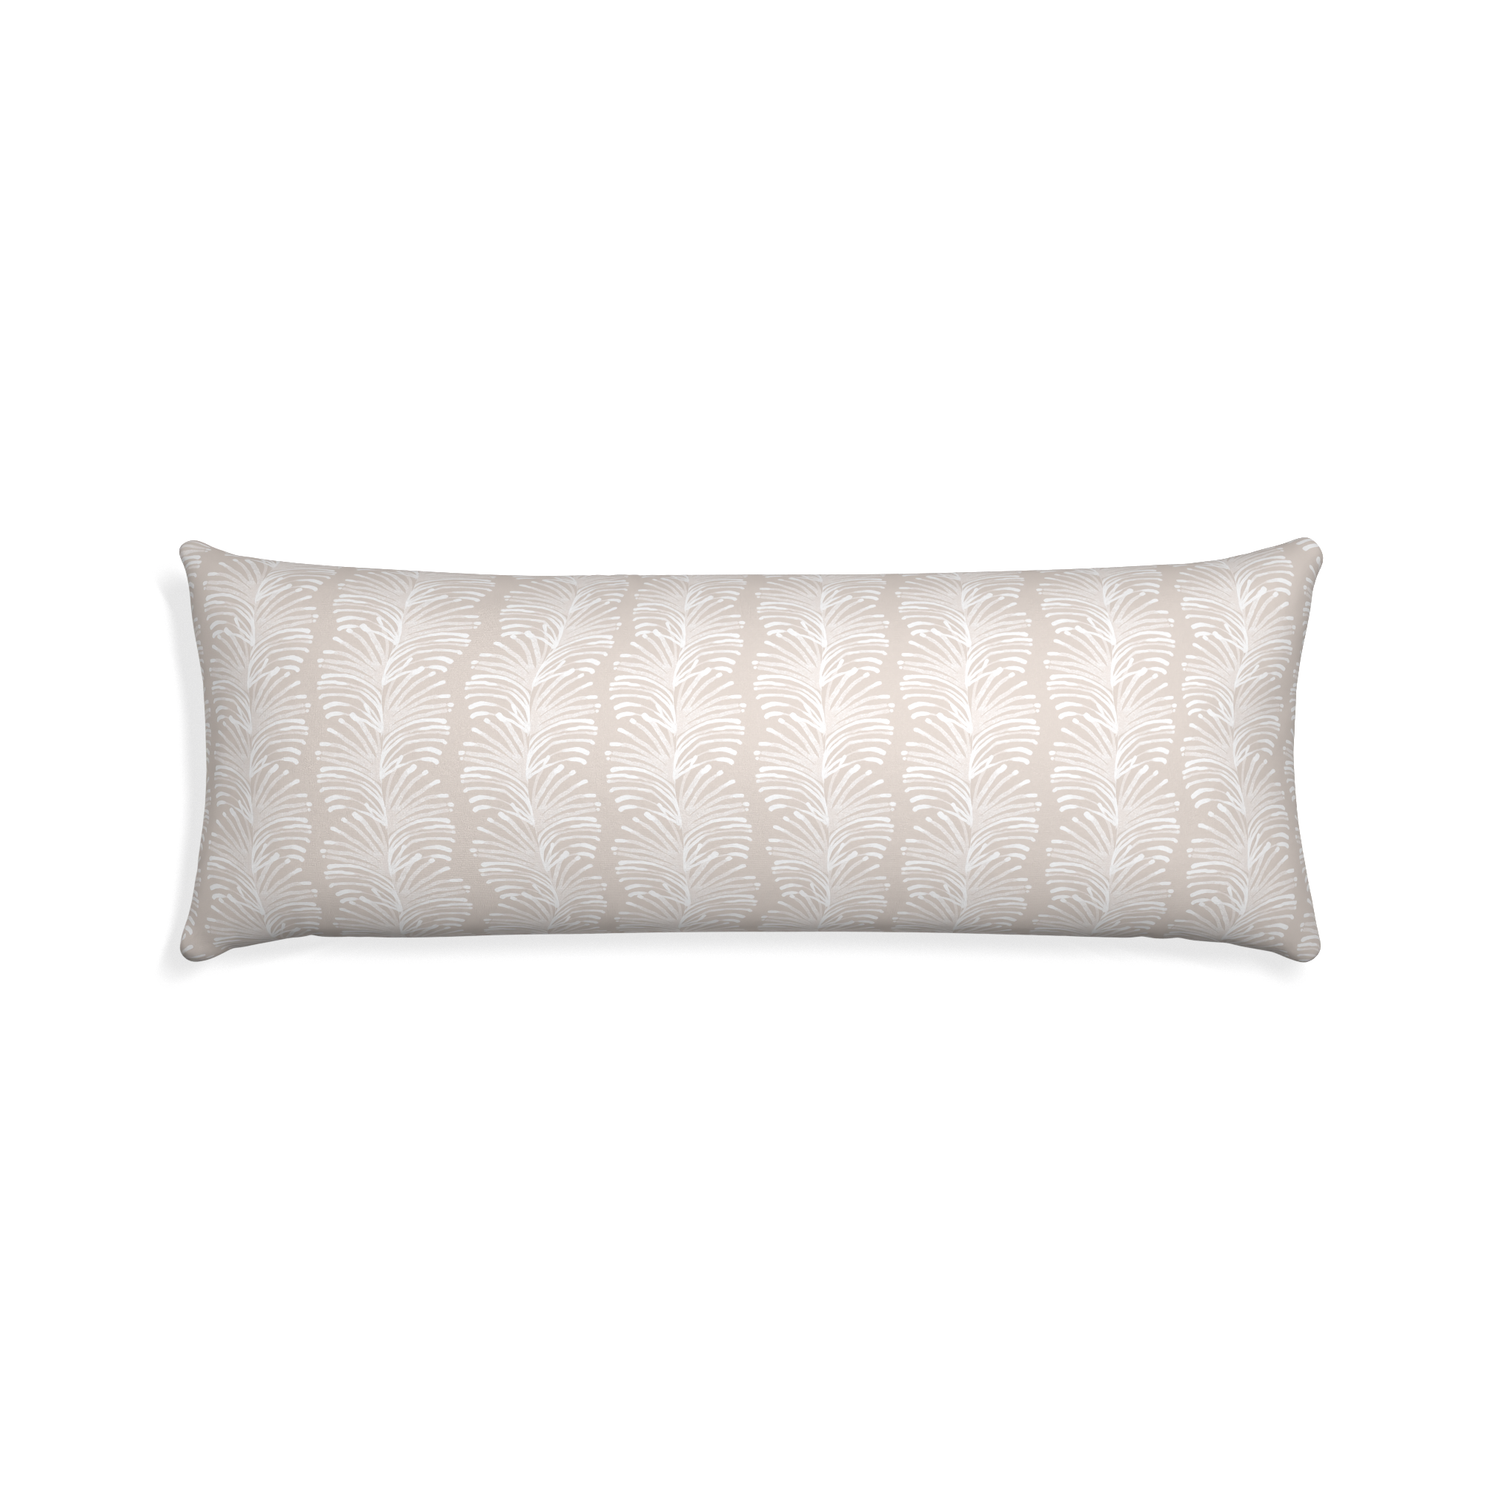 Xl-lumbar emma sand custom sand colored botanical stripepillow with none on white background